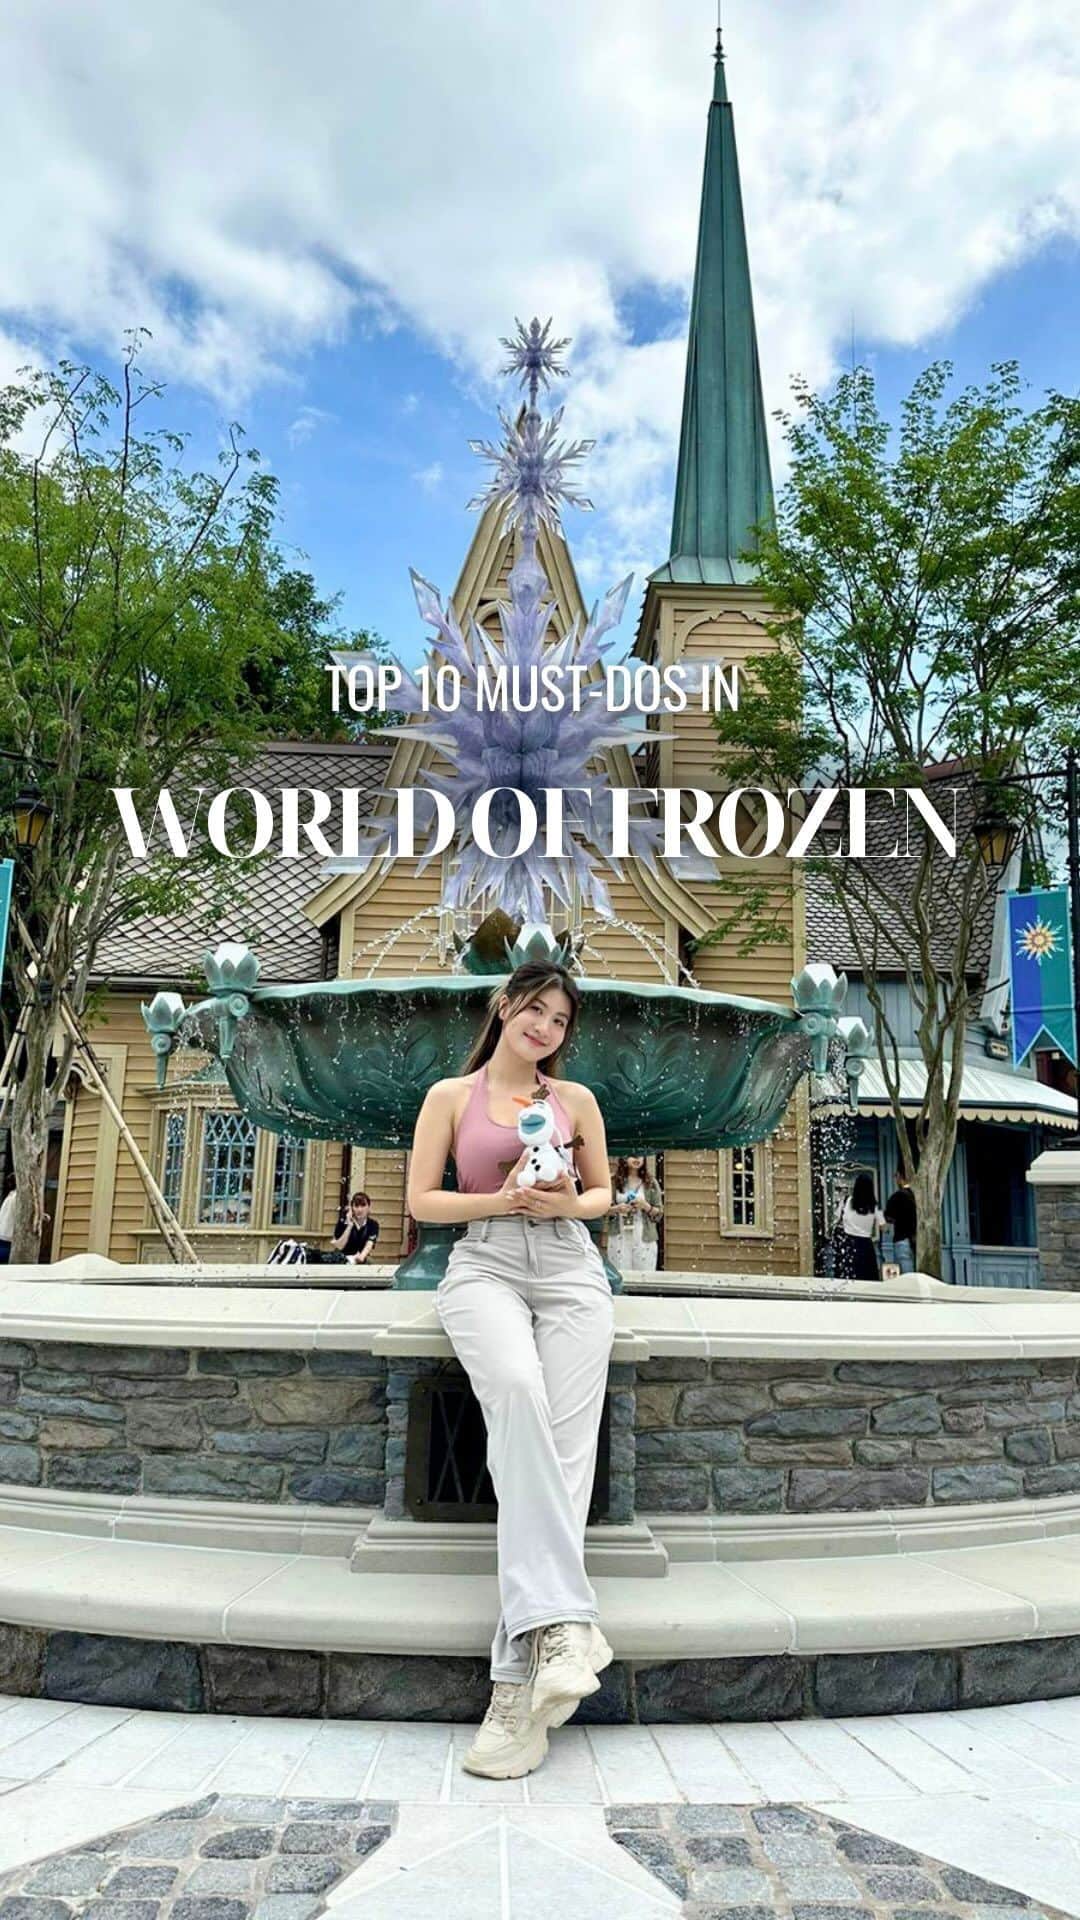 Discover Hong Kongのインスタグラム：「【Top 10 Must-Dos in World of Frozen❄️🏰】 📣The wait is finally over, we are bringing you a sneak peek into the World of Frozen that’s coming to @hkdisneyland on Nov 20!❄️ Make sure to mark down these 10 must-do items on your bucket list that will leave you spell bound.🪄 From the Arendelle castle🏰 to the “Frozen Ever After” musical boat ride🛶, every moment is going to feel like stepping right into the movie of Frozen.🎬 Save the date and let the magical adventure begin!✨  【10大你不錯過的《《魔雪奇緣》主題園區體驗❄️🏰】 📣終於等到喇 ❄️全球首個魔雪奇緣世界即將喺11月20日正式開幕，率先帶大家睇下全城期待嘅10大必玩體驗🪄，包括登上高速滑行嘅雪橇過山車🛶，飽覽阿德爾王國全景，仲可以坐木船參觀Elsa冰雪皇宮🏰，穿越神還原的電影經典場景！園區更設多個打卡位，例如阿德爾小鎮友誼噴泉及城堡👑，聽講入夜燈光後效果更靚。最後當然唔可以錯過滴答精品店及極光糖果屋🍭 ，一系列限定紀念品係掃貨之選，即刻睇片bookmark定你最喜愛嘅必玩項目。  #HelloHongKong #DiscoverHongKong #HelloTakesYouToMore」